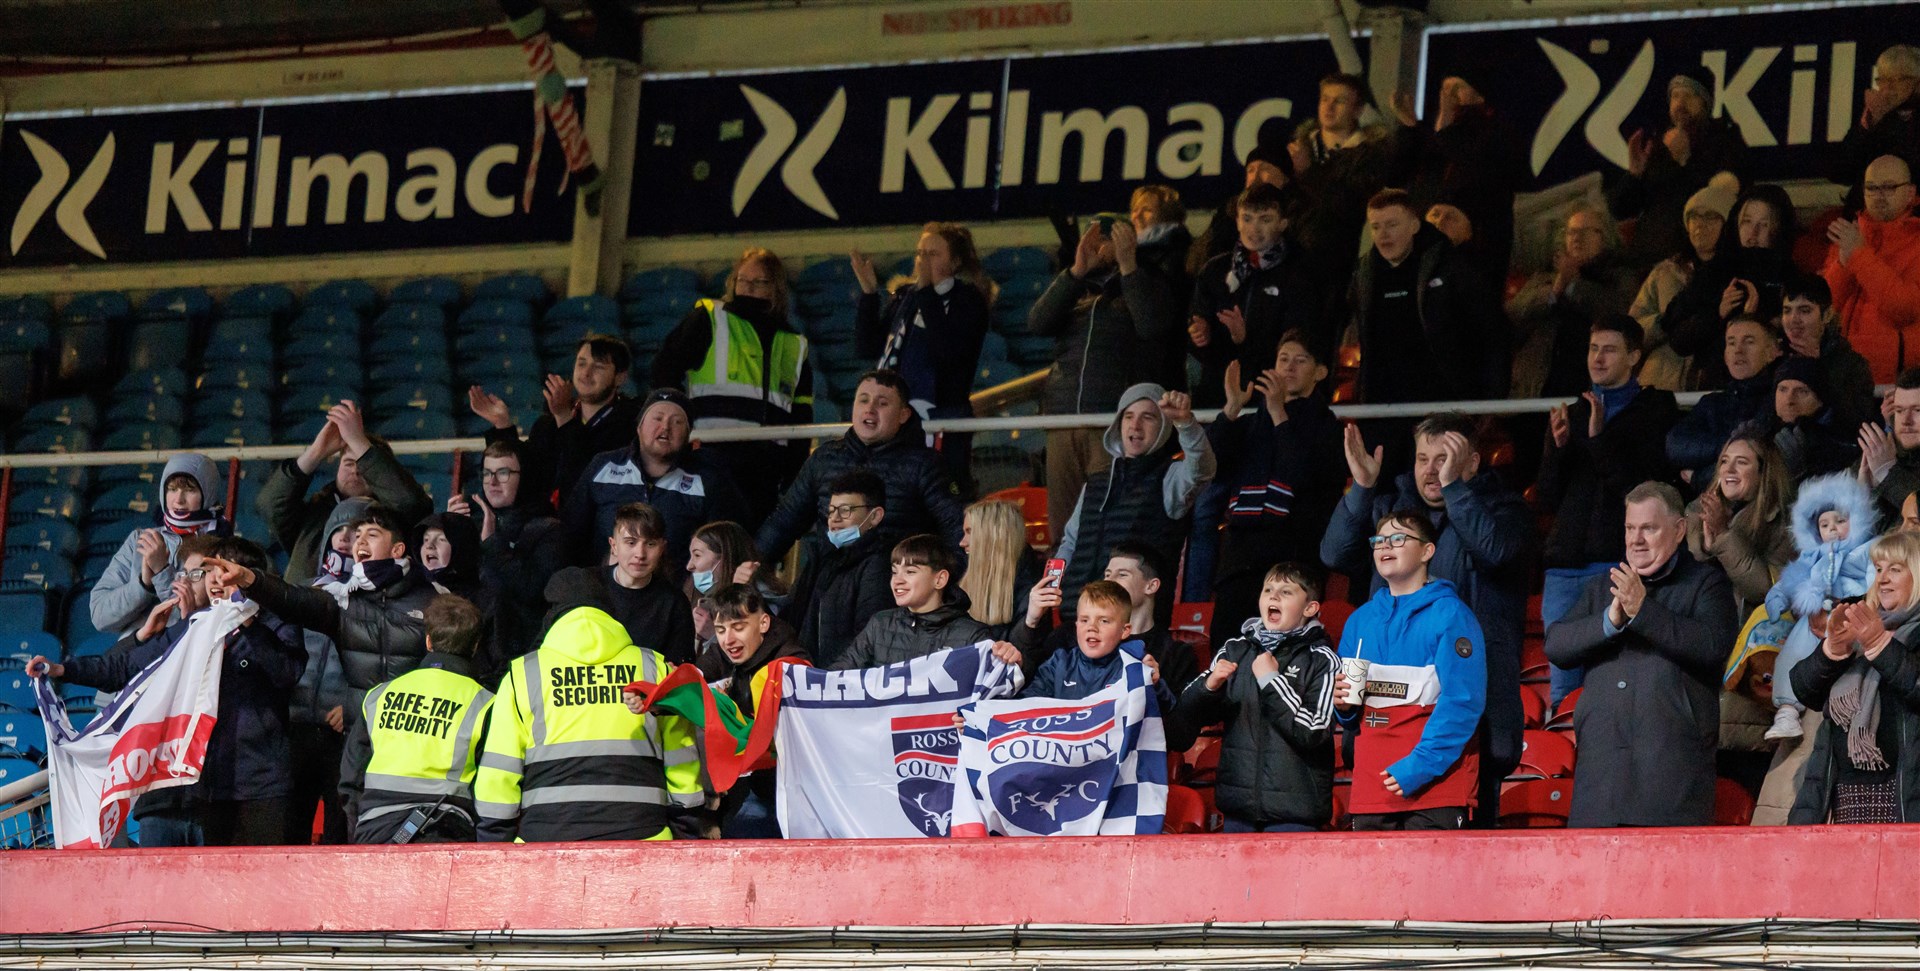 Ross County’s supporters have been increasingly vocal both at home in Dingwall and when following the Staggies across Scotland. Picture: Willie Va